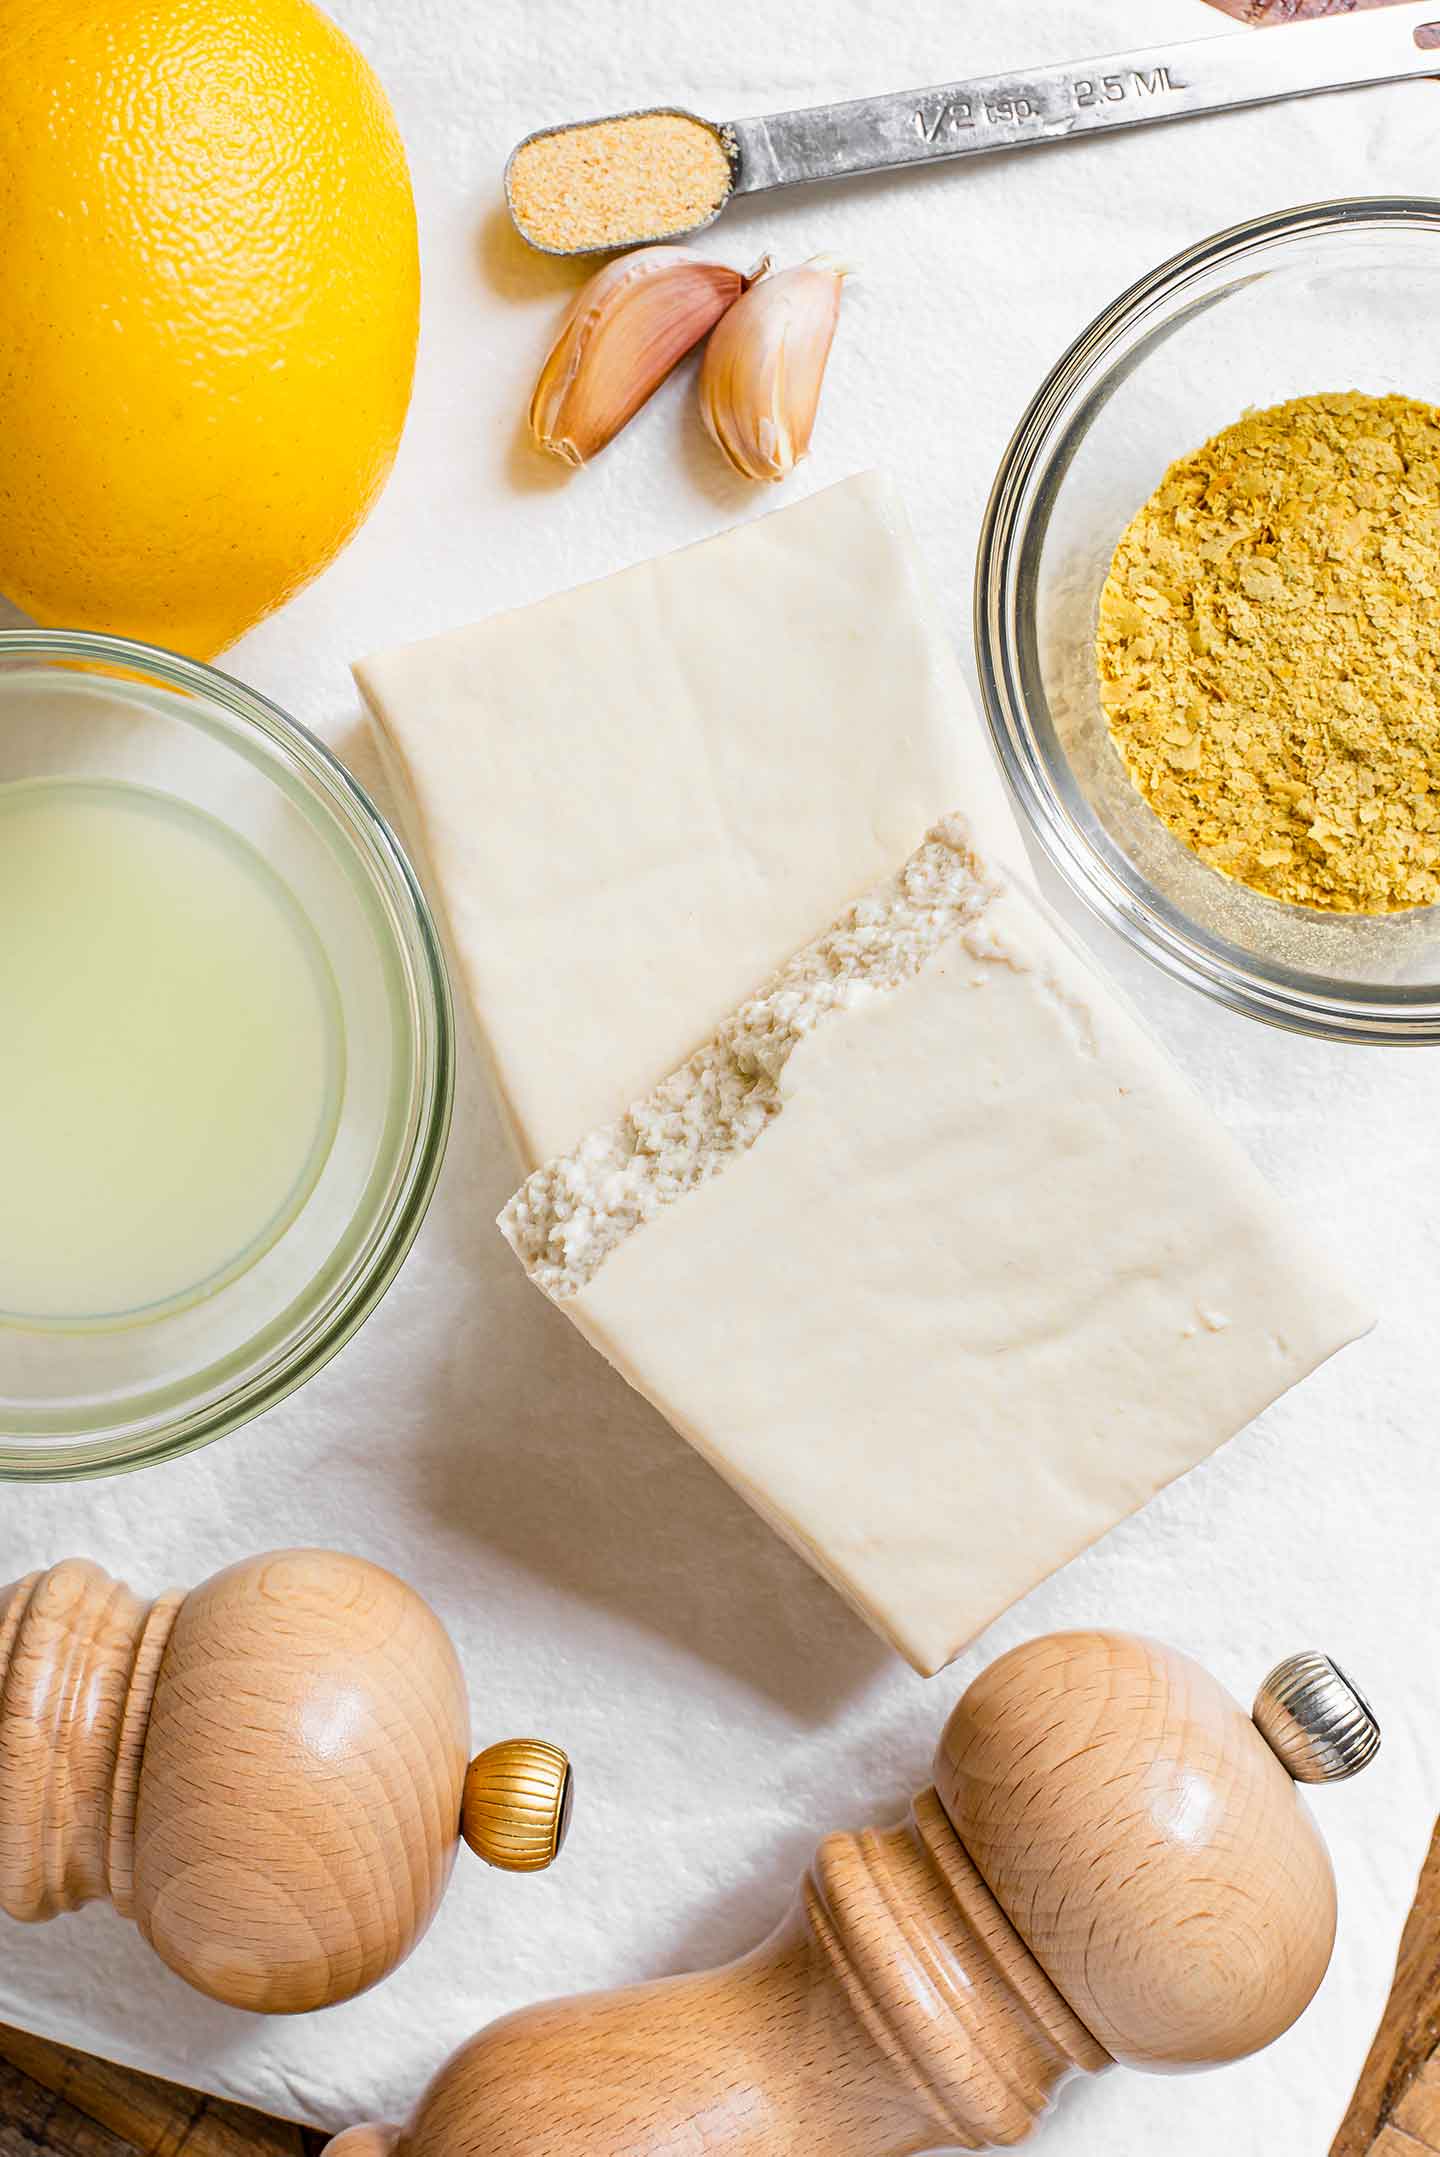 Top down view of ingredients on a white tray. a block of extra firm tofu is torn in half and surrounded by a lemon, garlic cloves, nutritional yeast, a dish of lemon juice and salt and pepper mills.